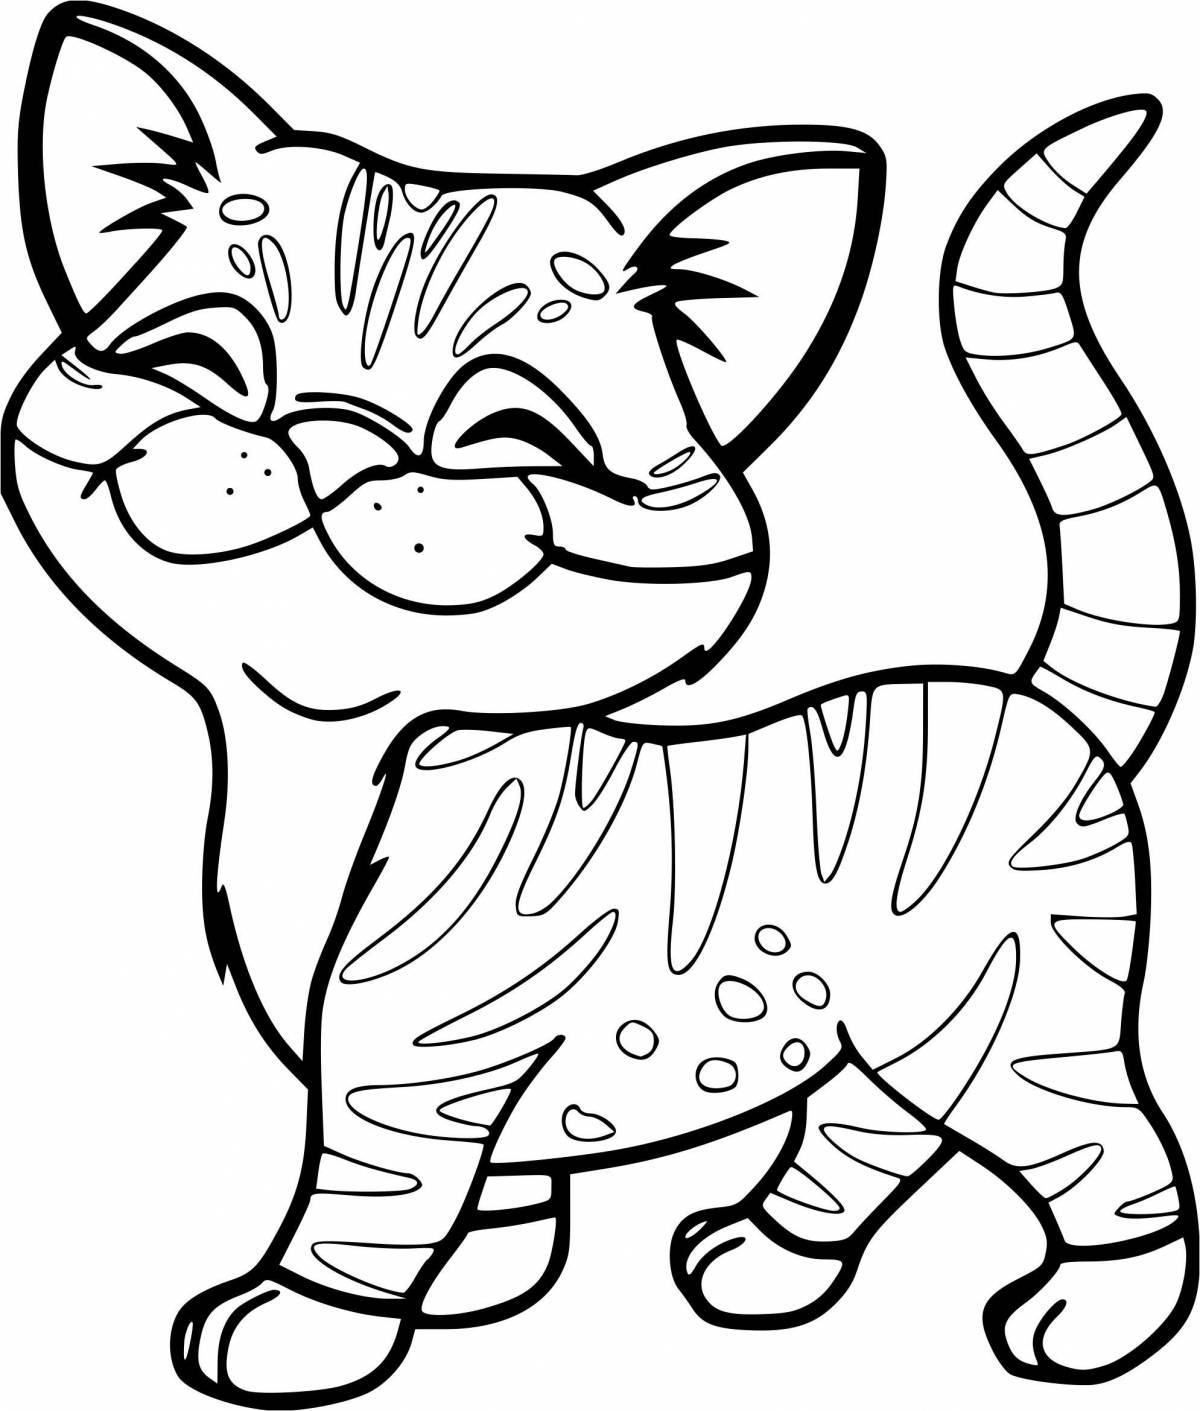 Silly kitty coloring book